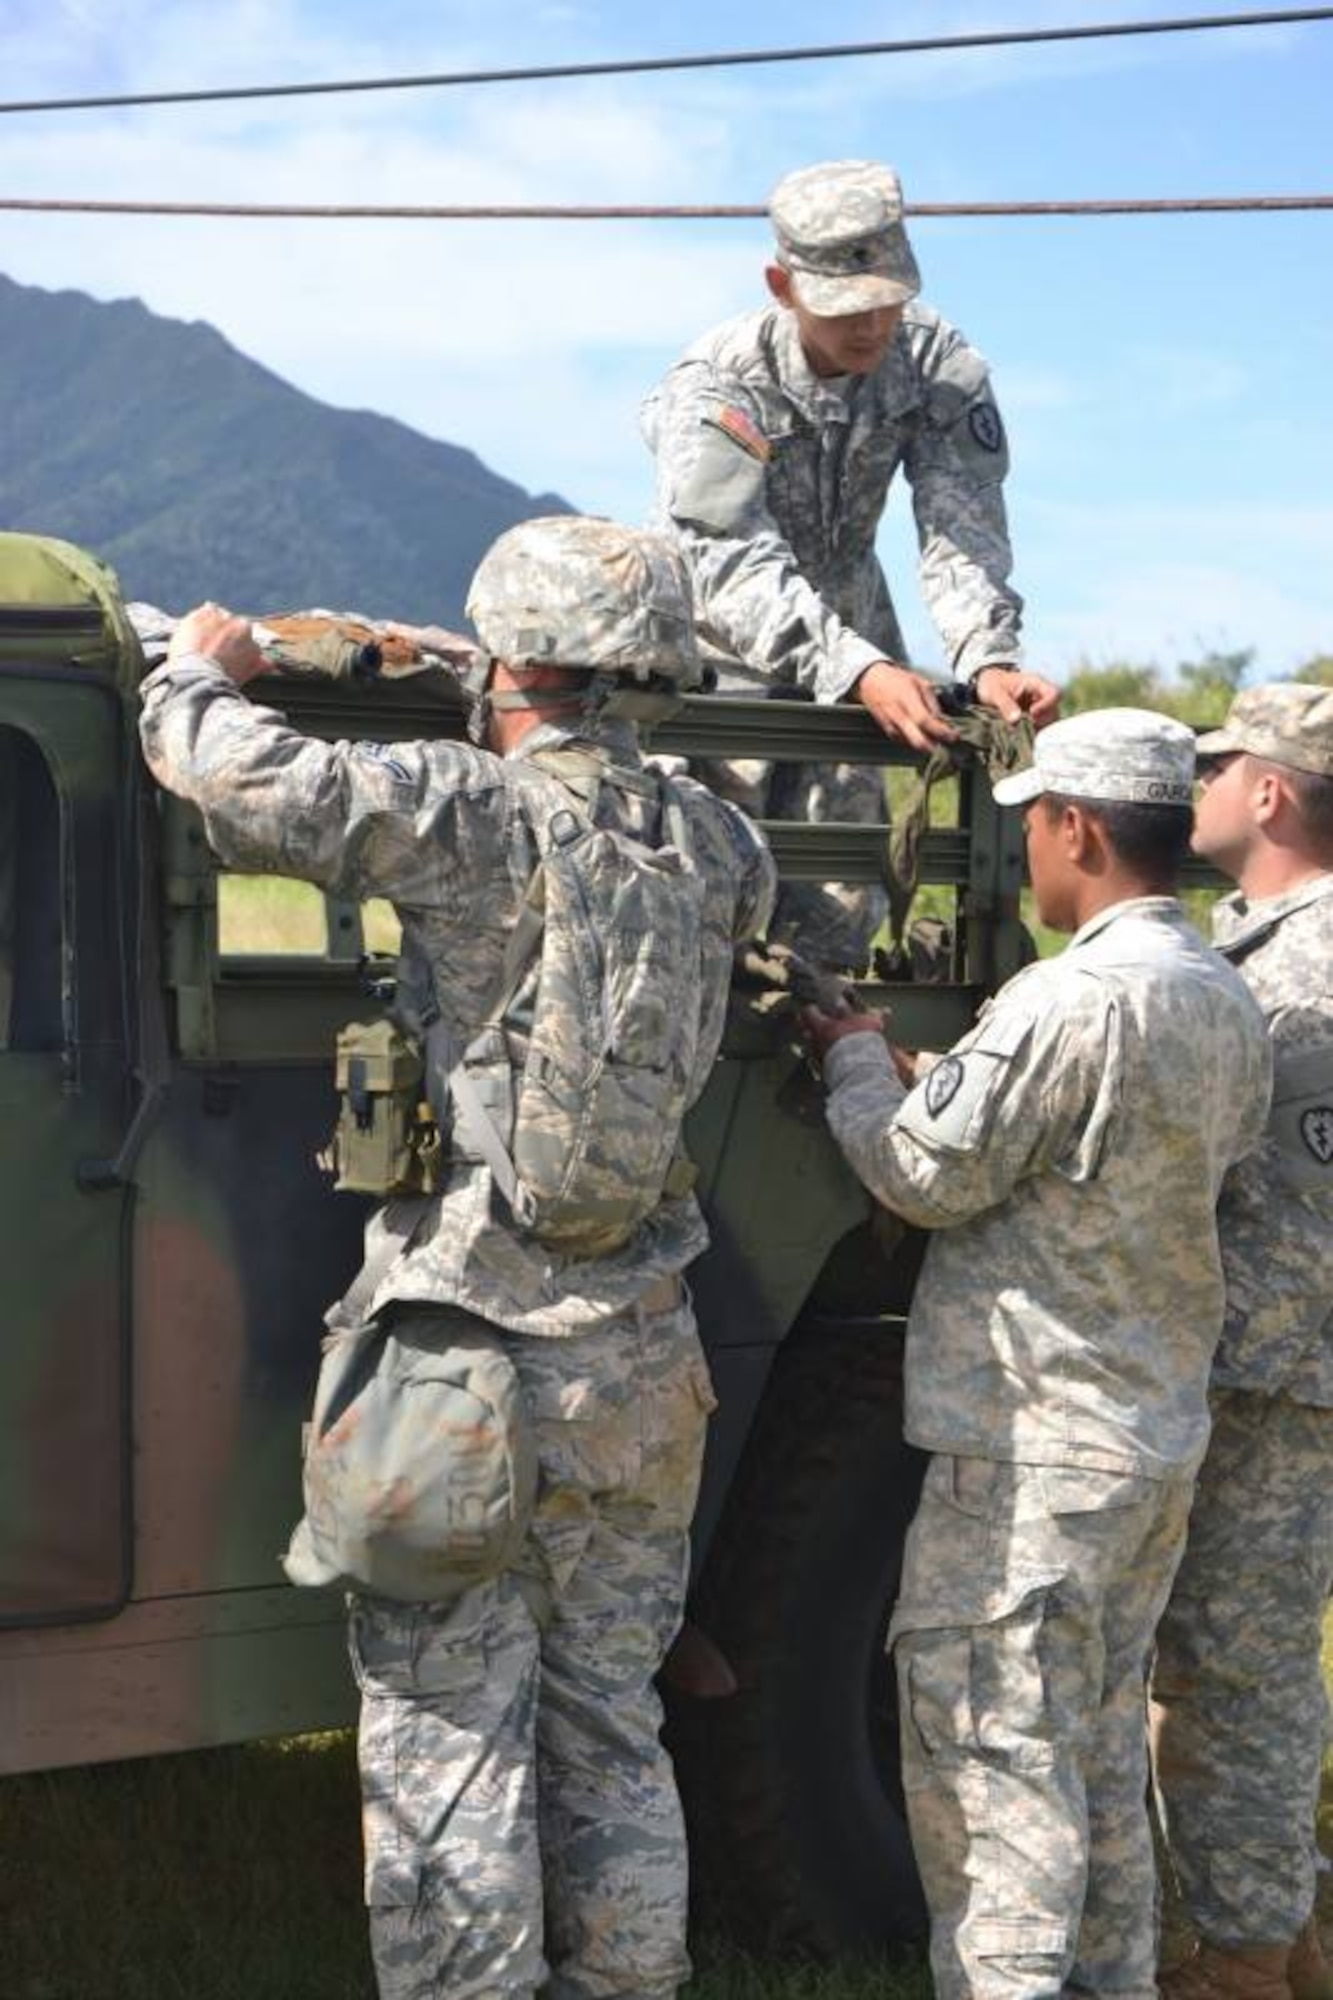 Four Expert Field Medical Badge course candidates tie a litter to the back of a HUMVEE during the EFMB course, which was held at Schofield Army Barracks, Hawaii, March 31 through April 11, 2014. The candidates had to demonstrate their ability to load a casualty onto a standard and non-standard platform. Additionally, to successfully complete the course, students had to demonstrate their proficiency at tactical combat casualty care, take a written test, execute U.S. Army Warrior communications and chemical, biological, radiological, nuclear and high-yield explosives tasks, perform day and night land navigation and complete a 12-mile road march. (U.S. Army photo courtesy of 25th Infantry Division)
 
